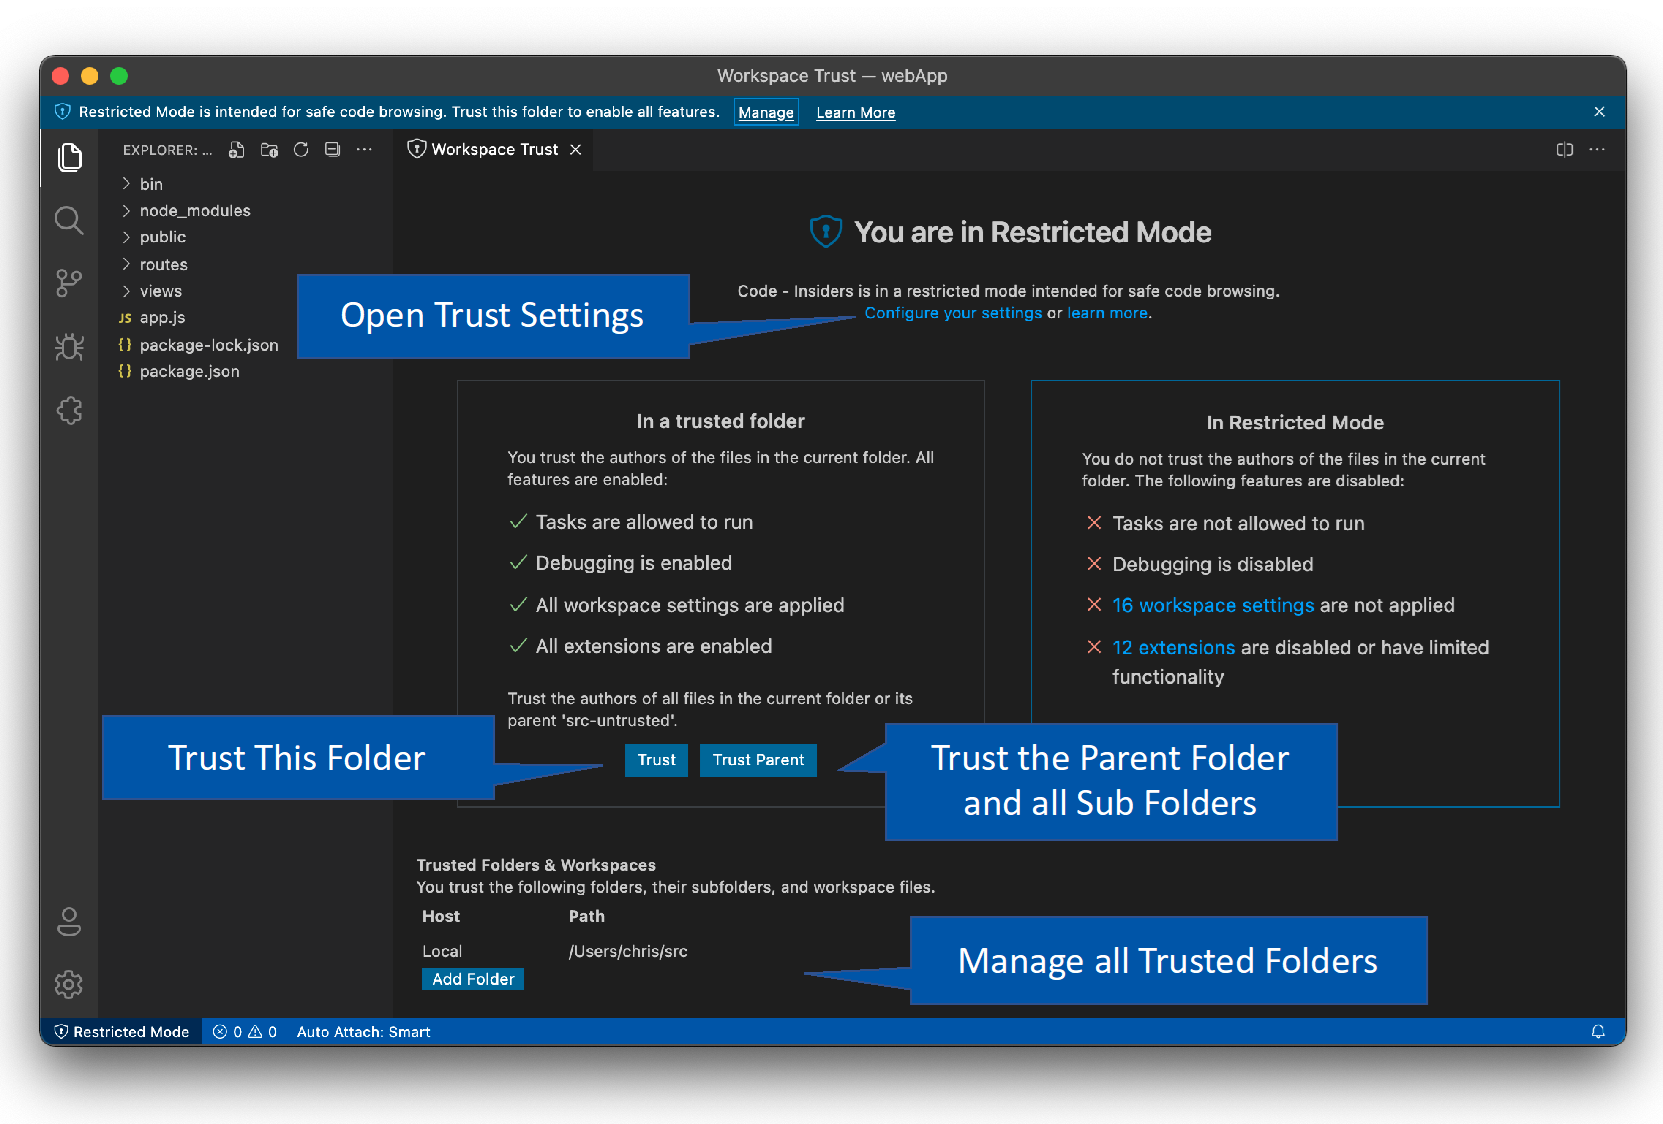 Workspace Trust editor with annotations